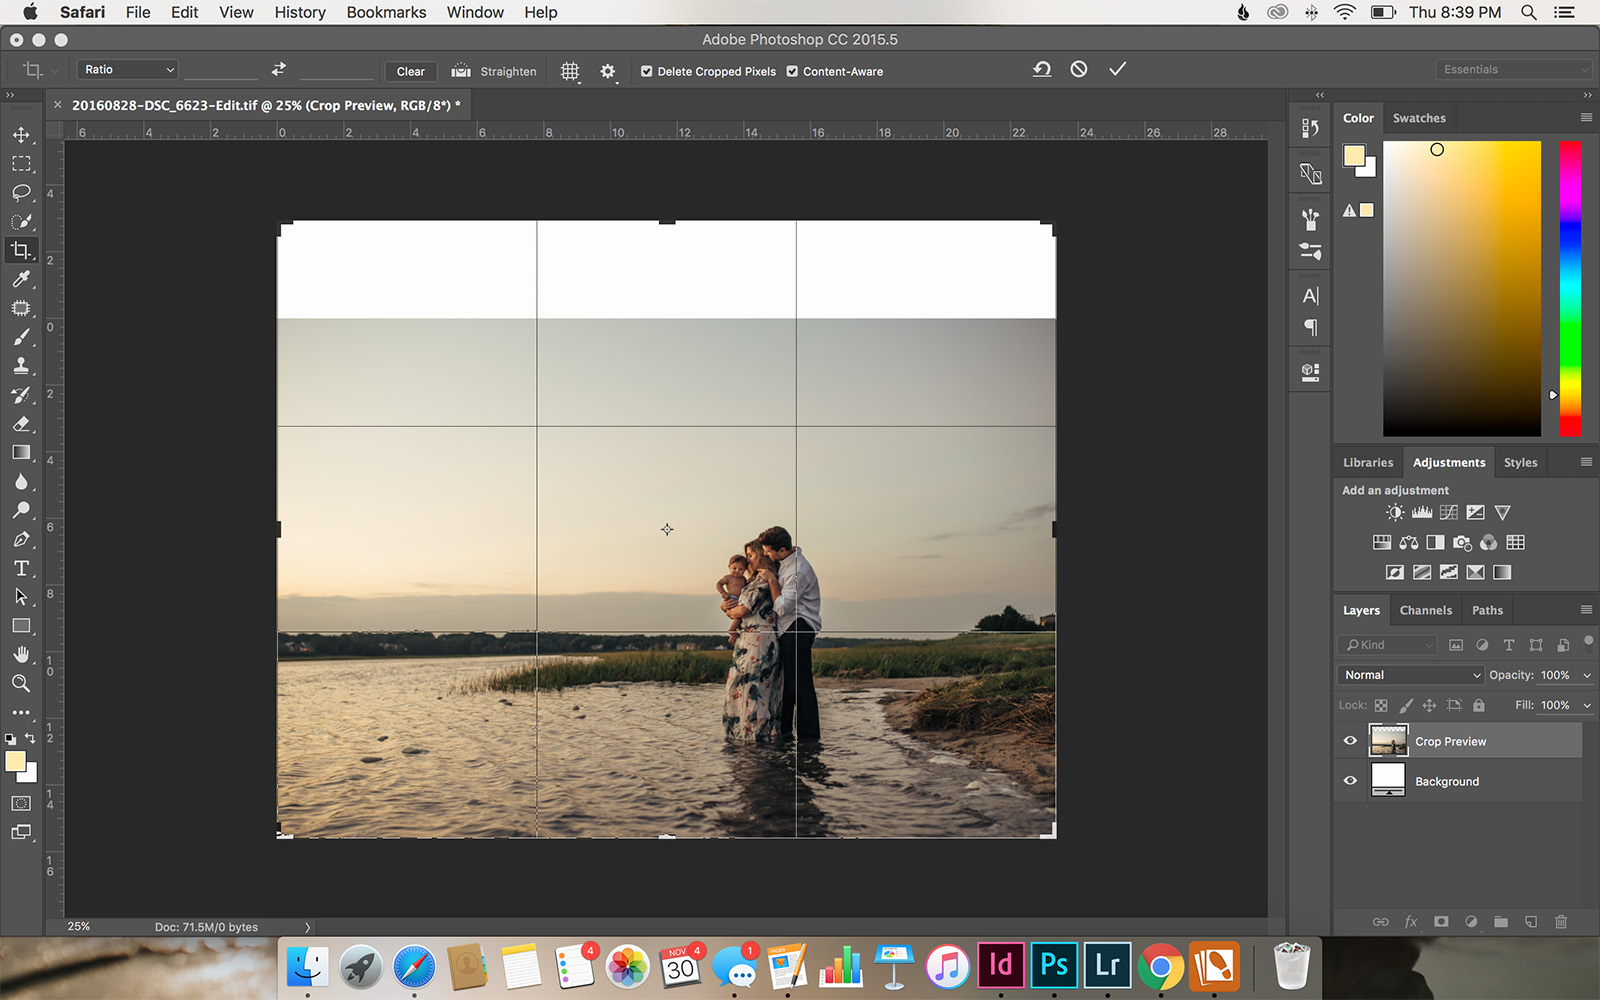 I'm a Lightroom girl. However, there are a few situations where Photoshop can deliver a result that is stronger or faster than what I can do in Lightroom.